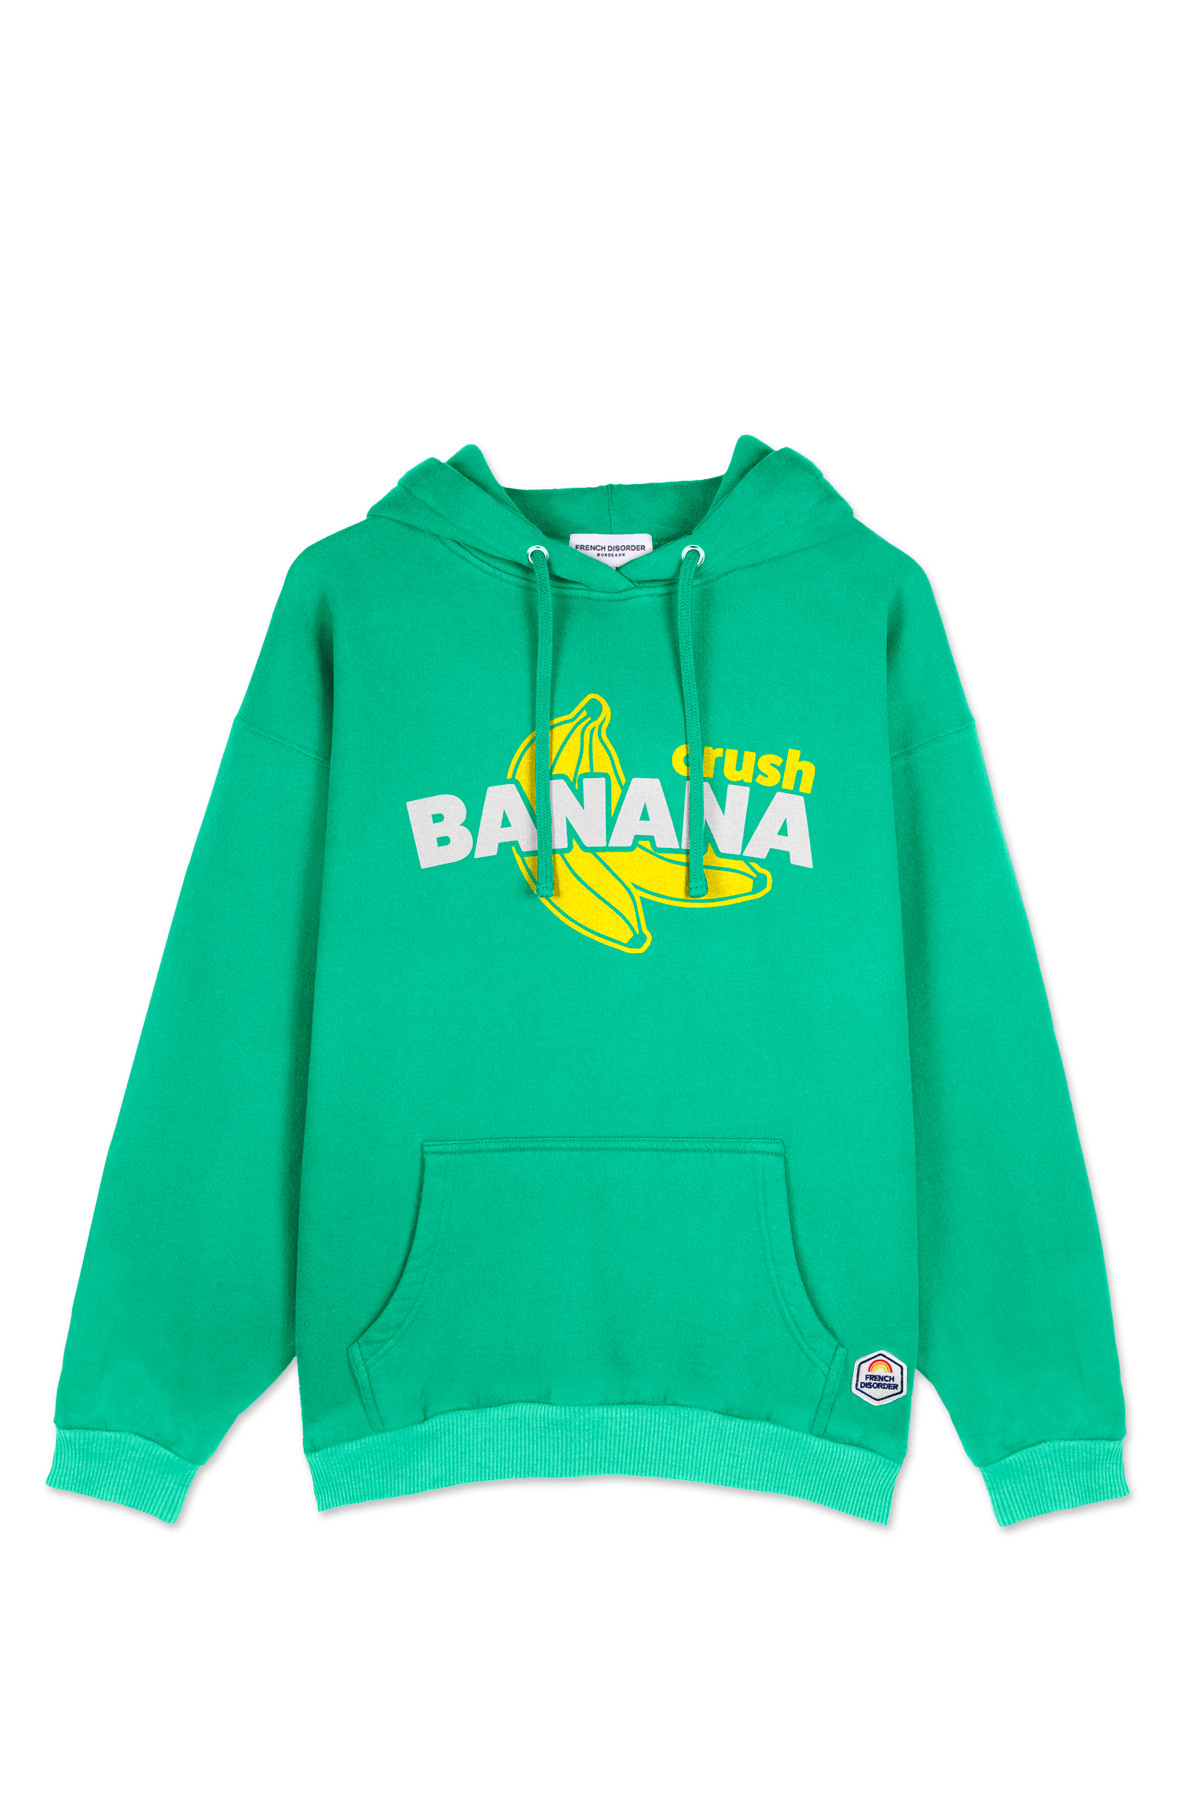 Photo de SWEATS À CAPUCHE Hoodie HOMME Washed BANANA chez French Disorder